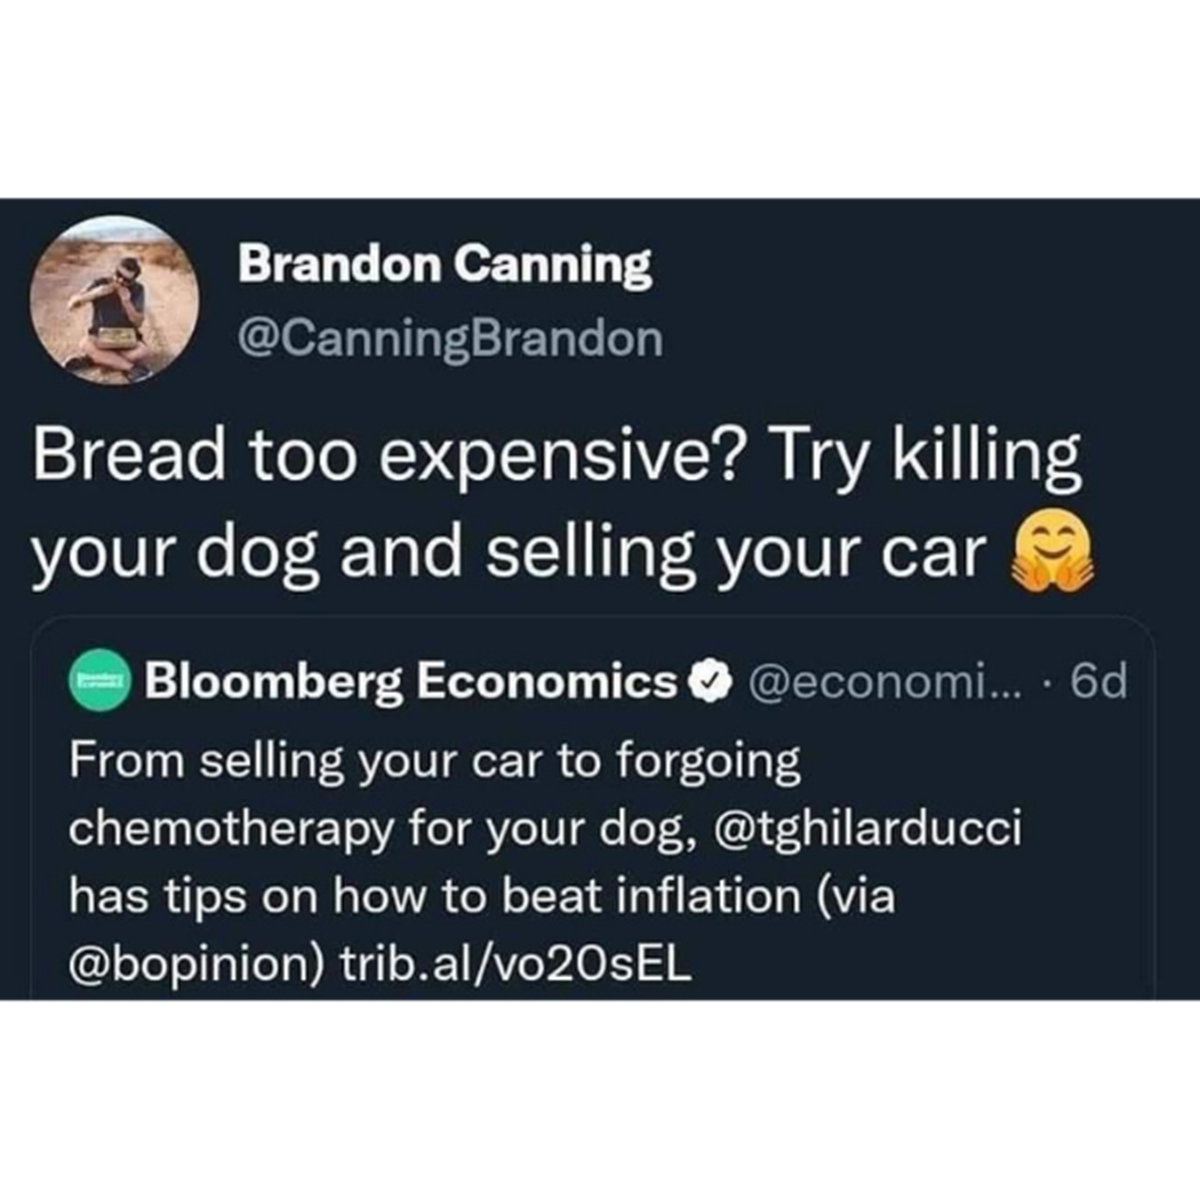 screenshot - Brandon Canning Bread too expensive? Try killing your dog and selling your car Bloomberg Economics .... 6d From selling your car to forgoing chemotherapy for your dog, has tips on how to beat inflation via trib.alvo20SEL